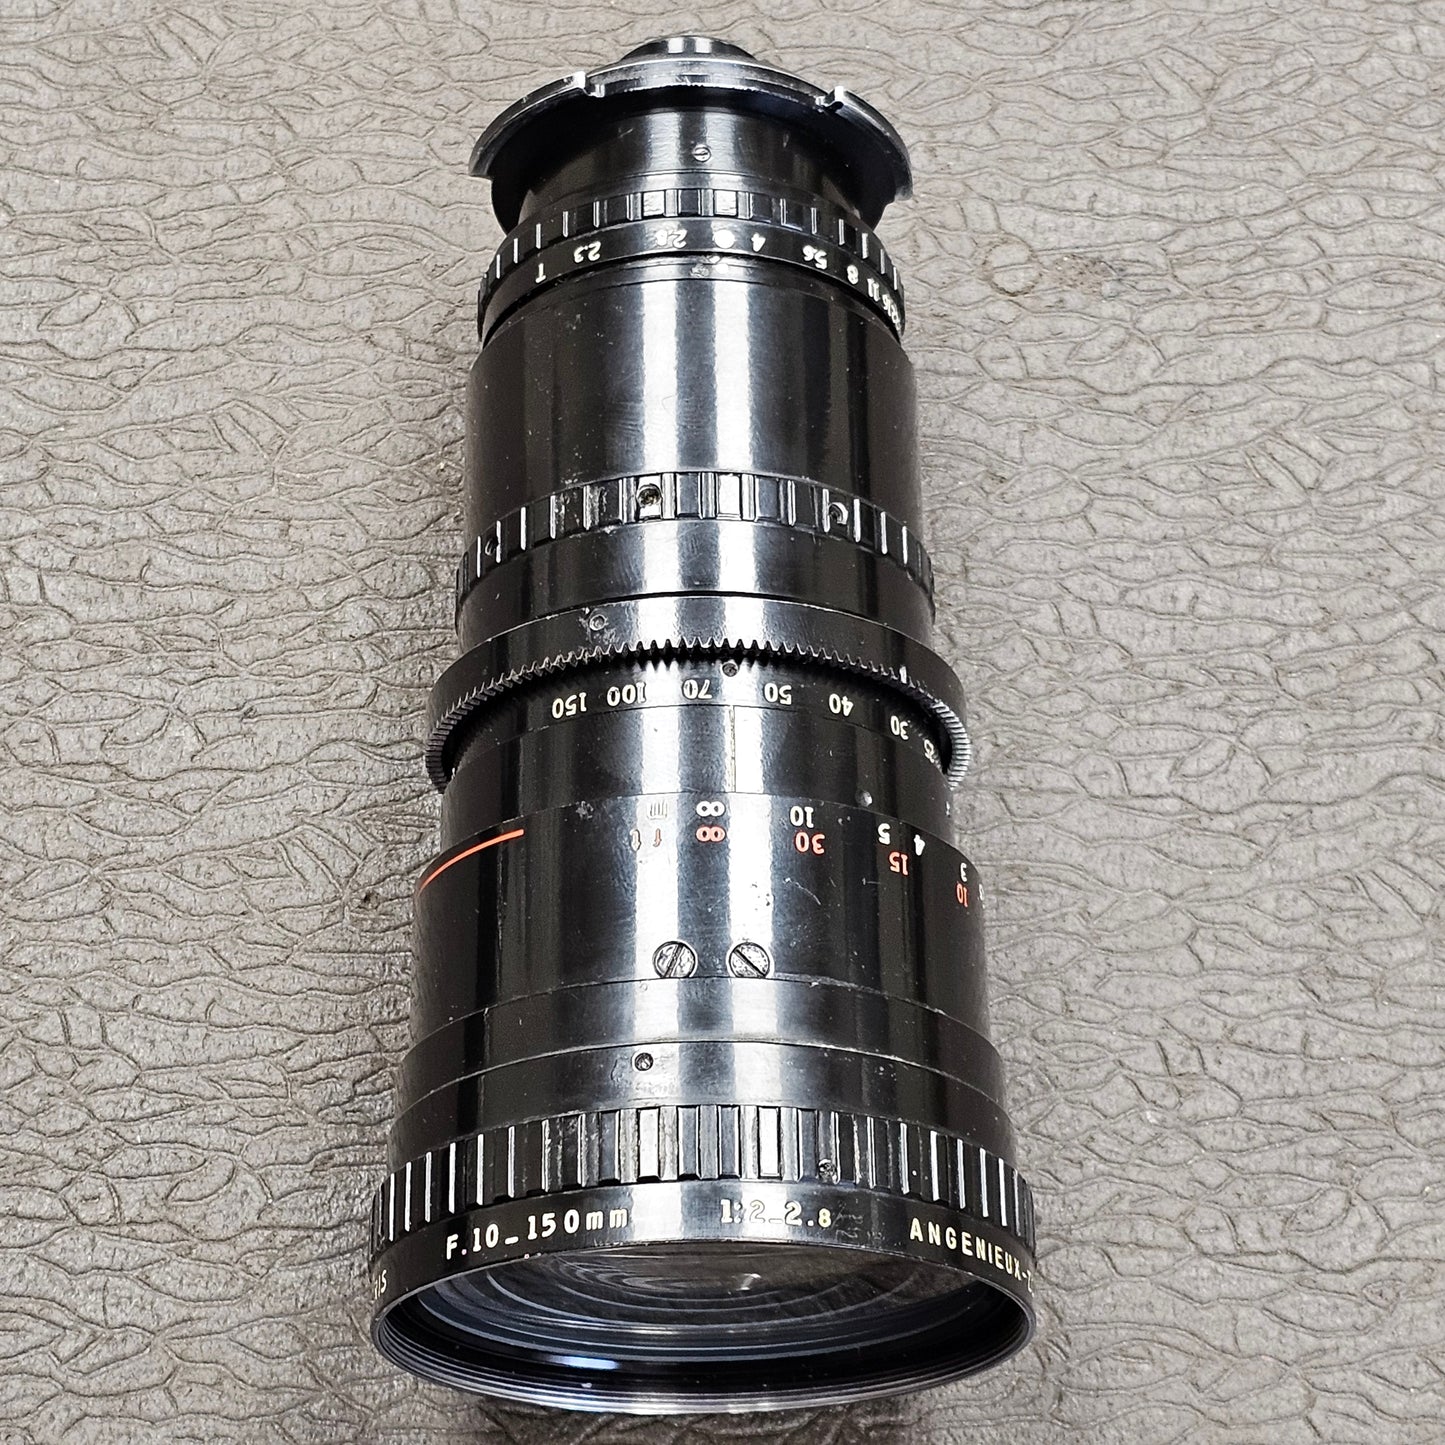 Angenieux 10-150mm T2.3 Type 15 x 10B Zoom Lens in CP-16 Mount S# 1413891